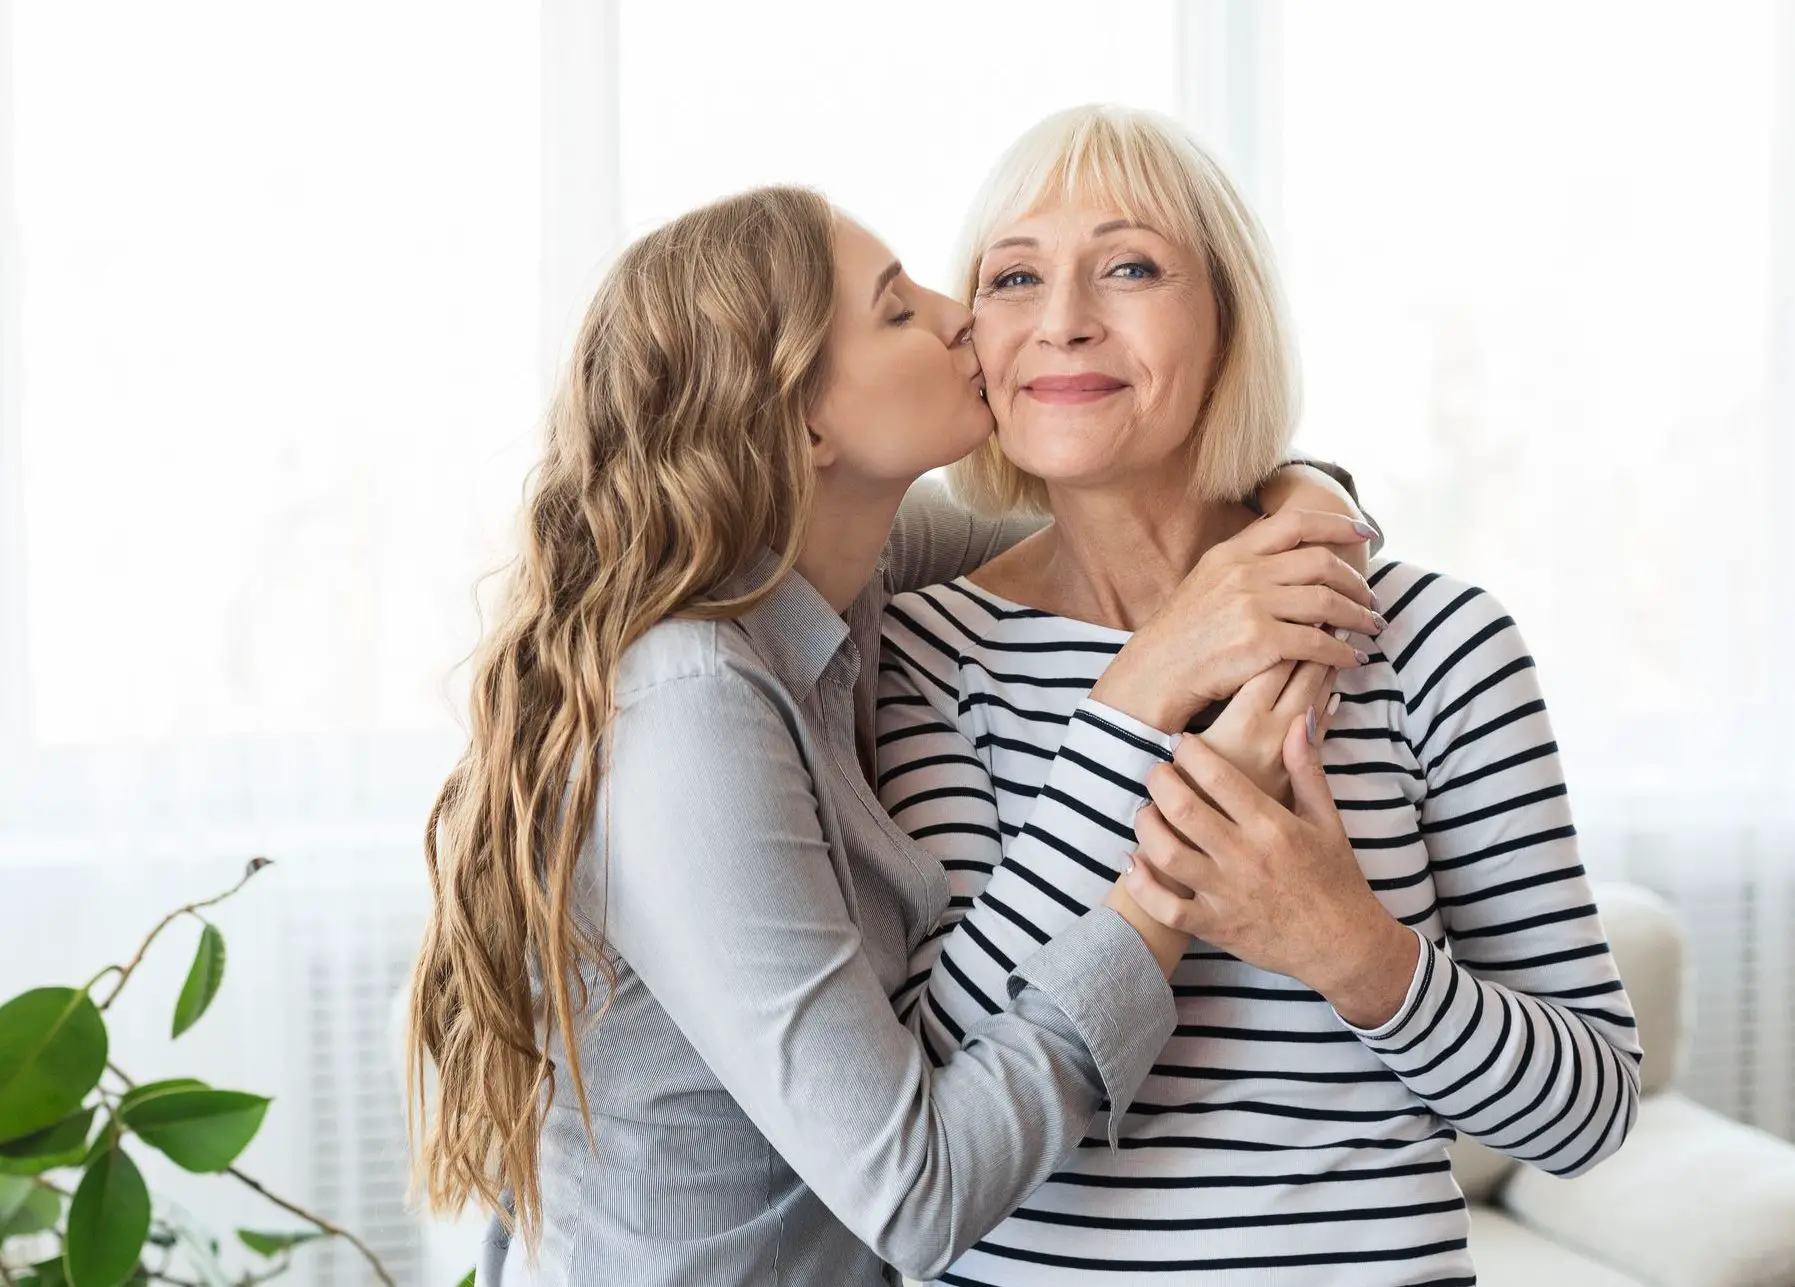 10 Fun Ways To Bond With Your Teenage Daughter